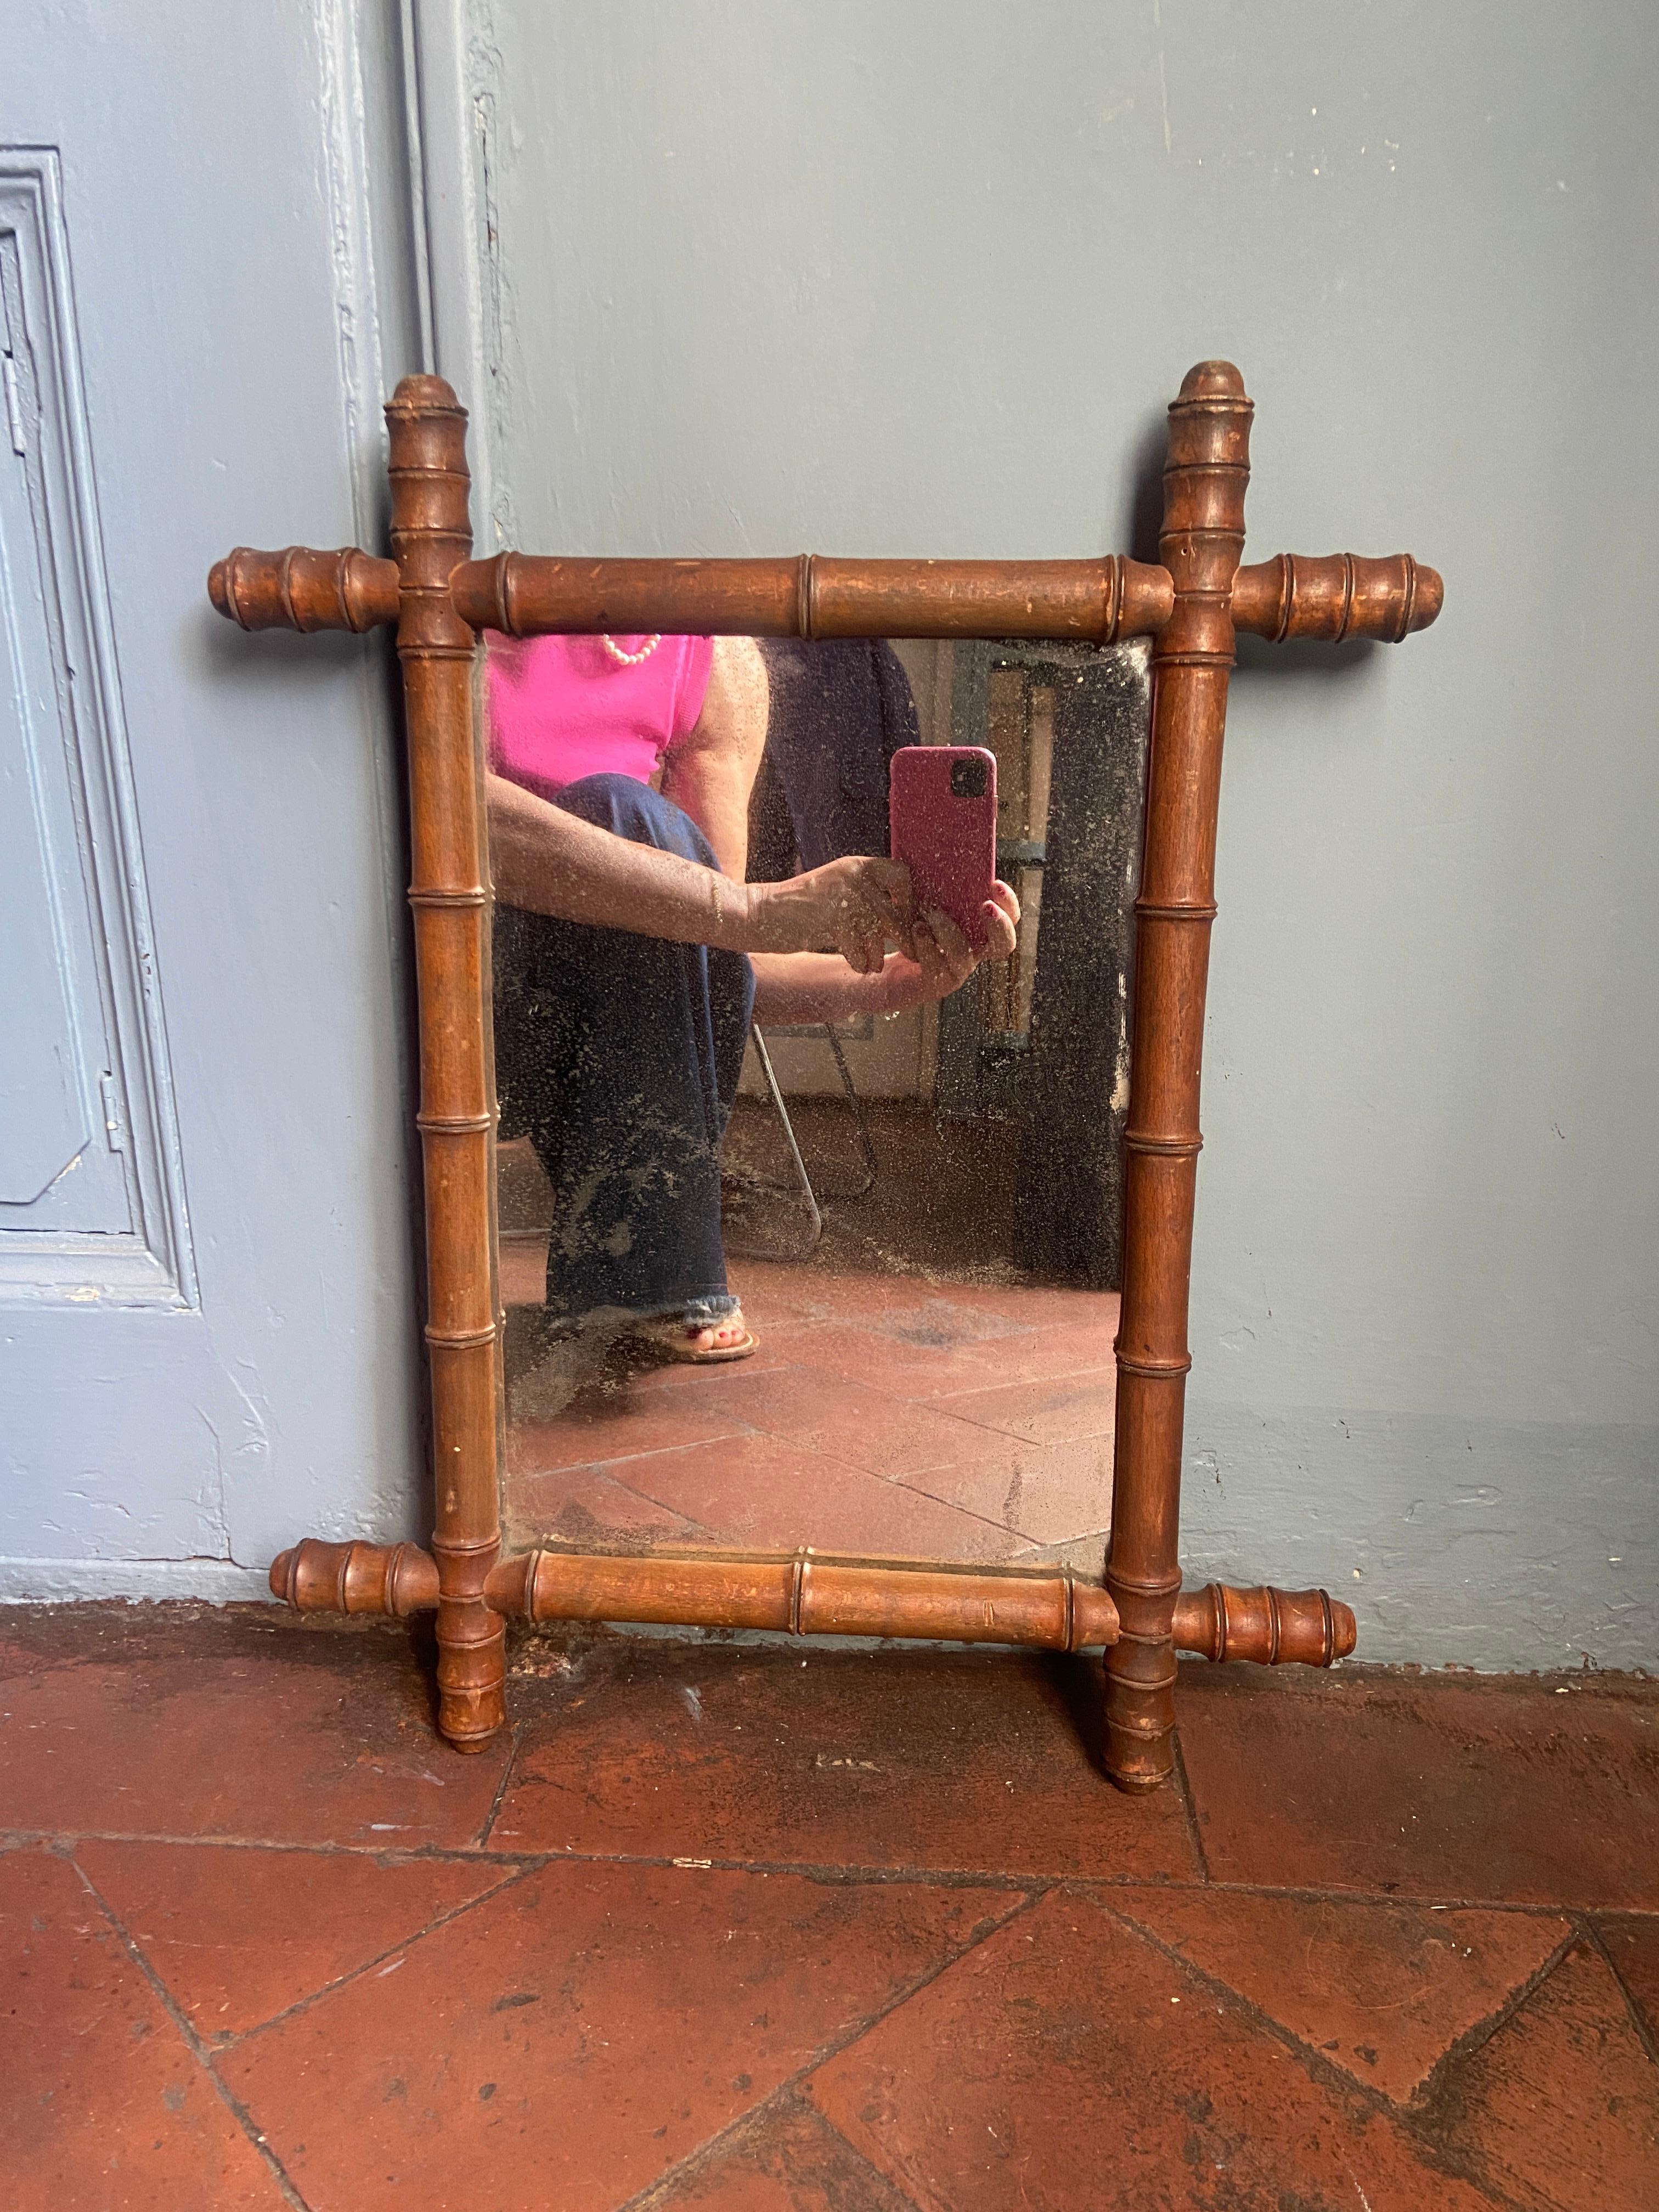 Mid-Century French Faux Bamboo Wall Mirror with oak wood frame and original mirror.
The mirror has a beautiful patina due to age and use